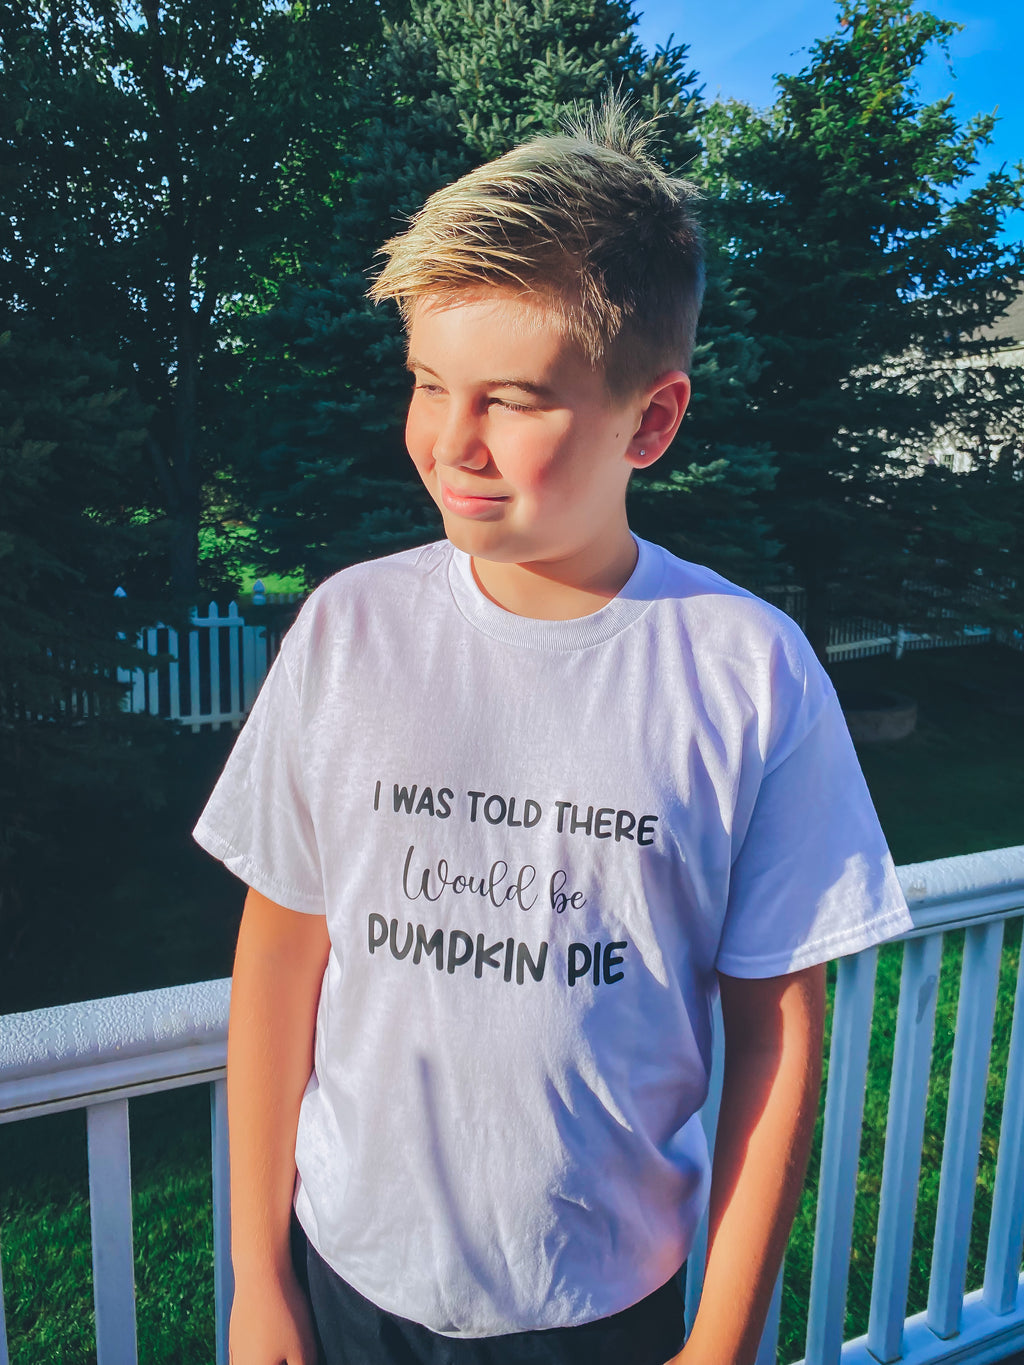 I was told there would be pumpkin pie (youth sizes)